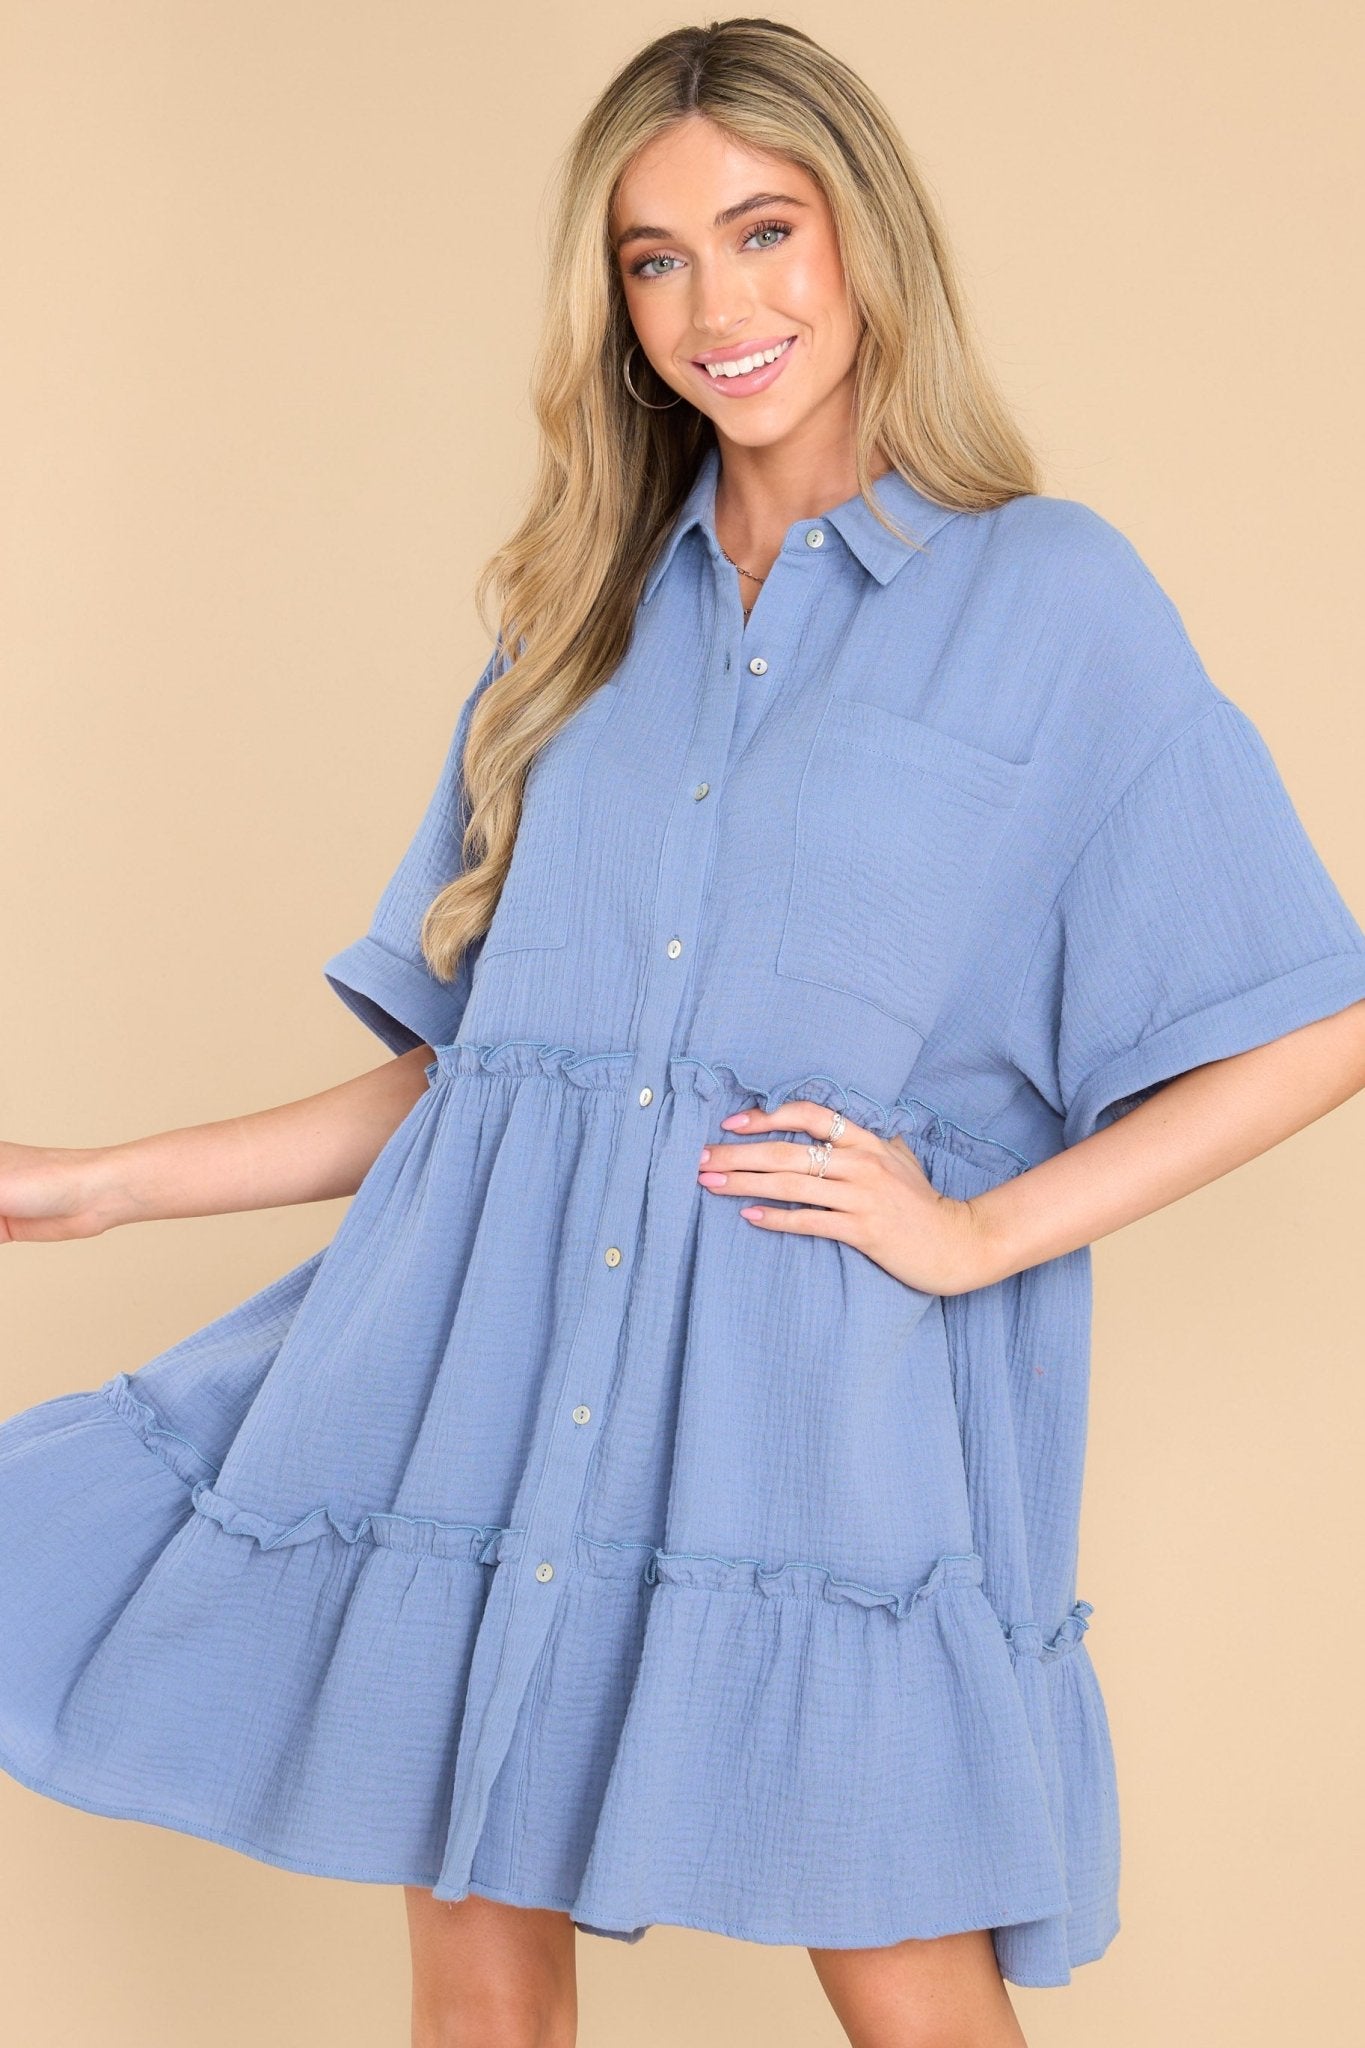 This blue dress features a collared neckline, functional buttons down the front, functional pockets at the bust, short sleeves with folded cuffs, and ruffle detailing throughout the skirt.